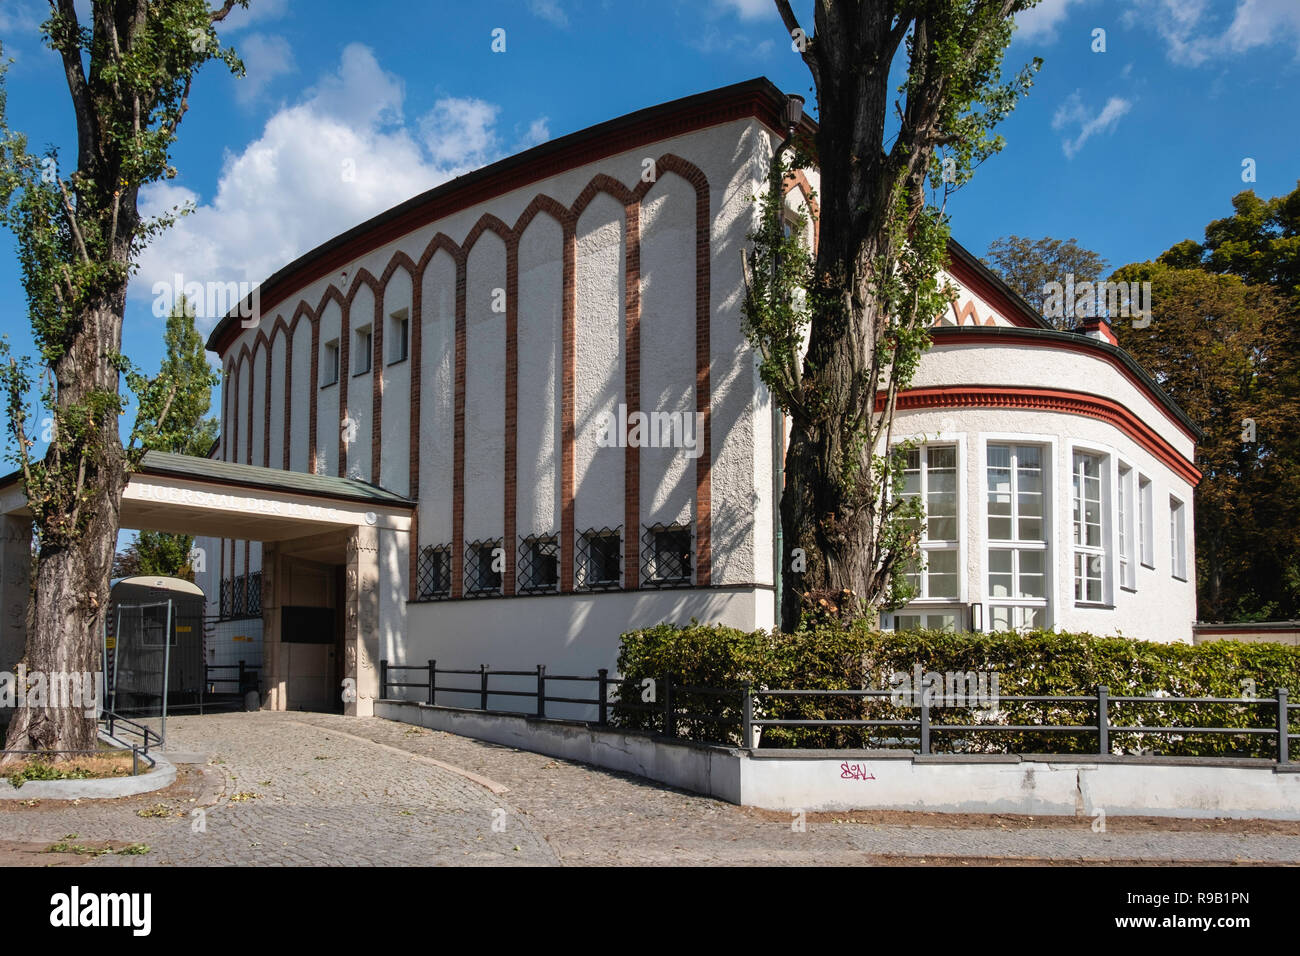 Berlin, Dahlem,Ihnestr 16-20, Harnack House, Conference Venue of the Max Planck Society.Opened in 1929 to promote German Science Stock Photo